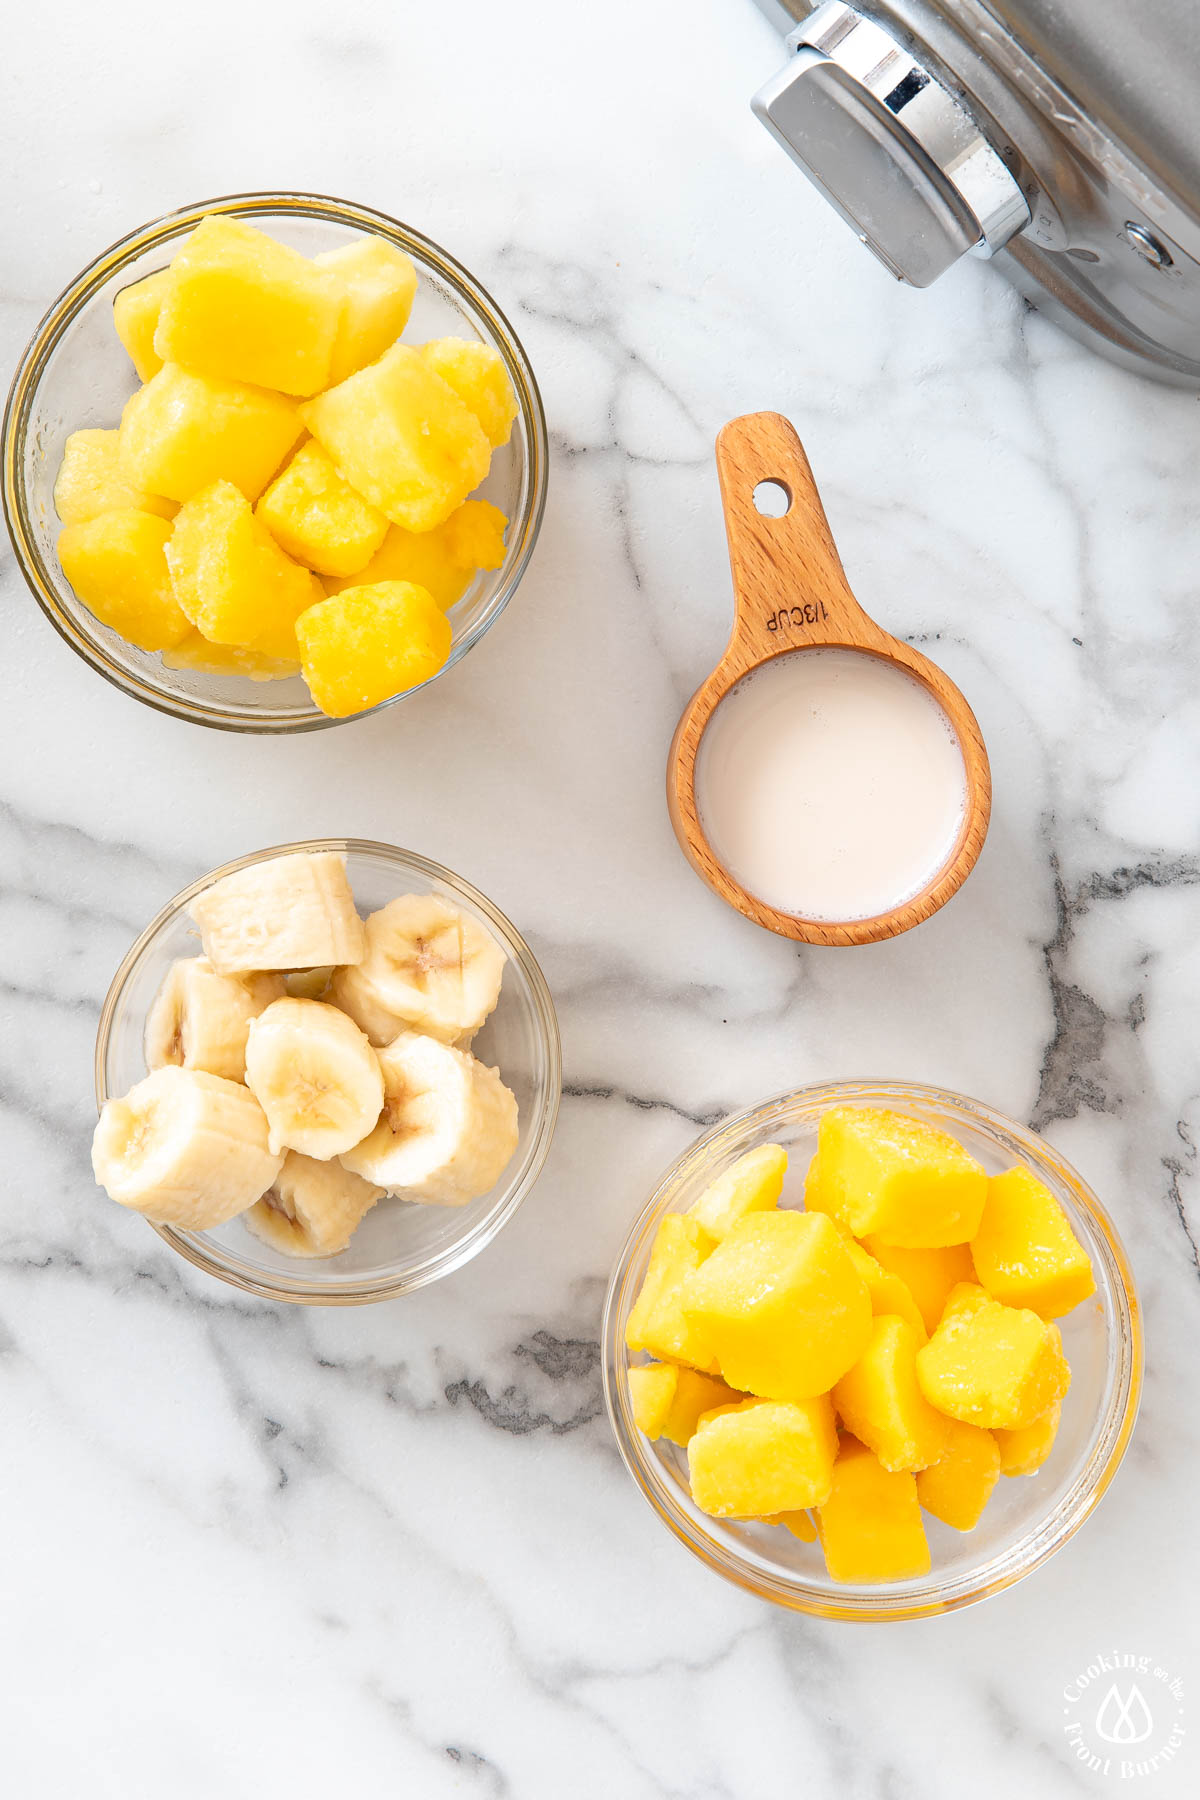 frozen mango, banana and mango in bowls; cup of almond milk